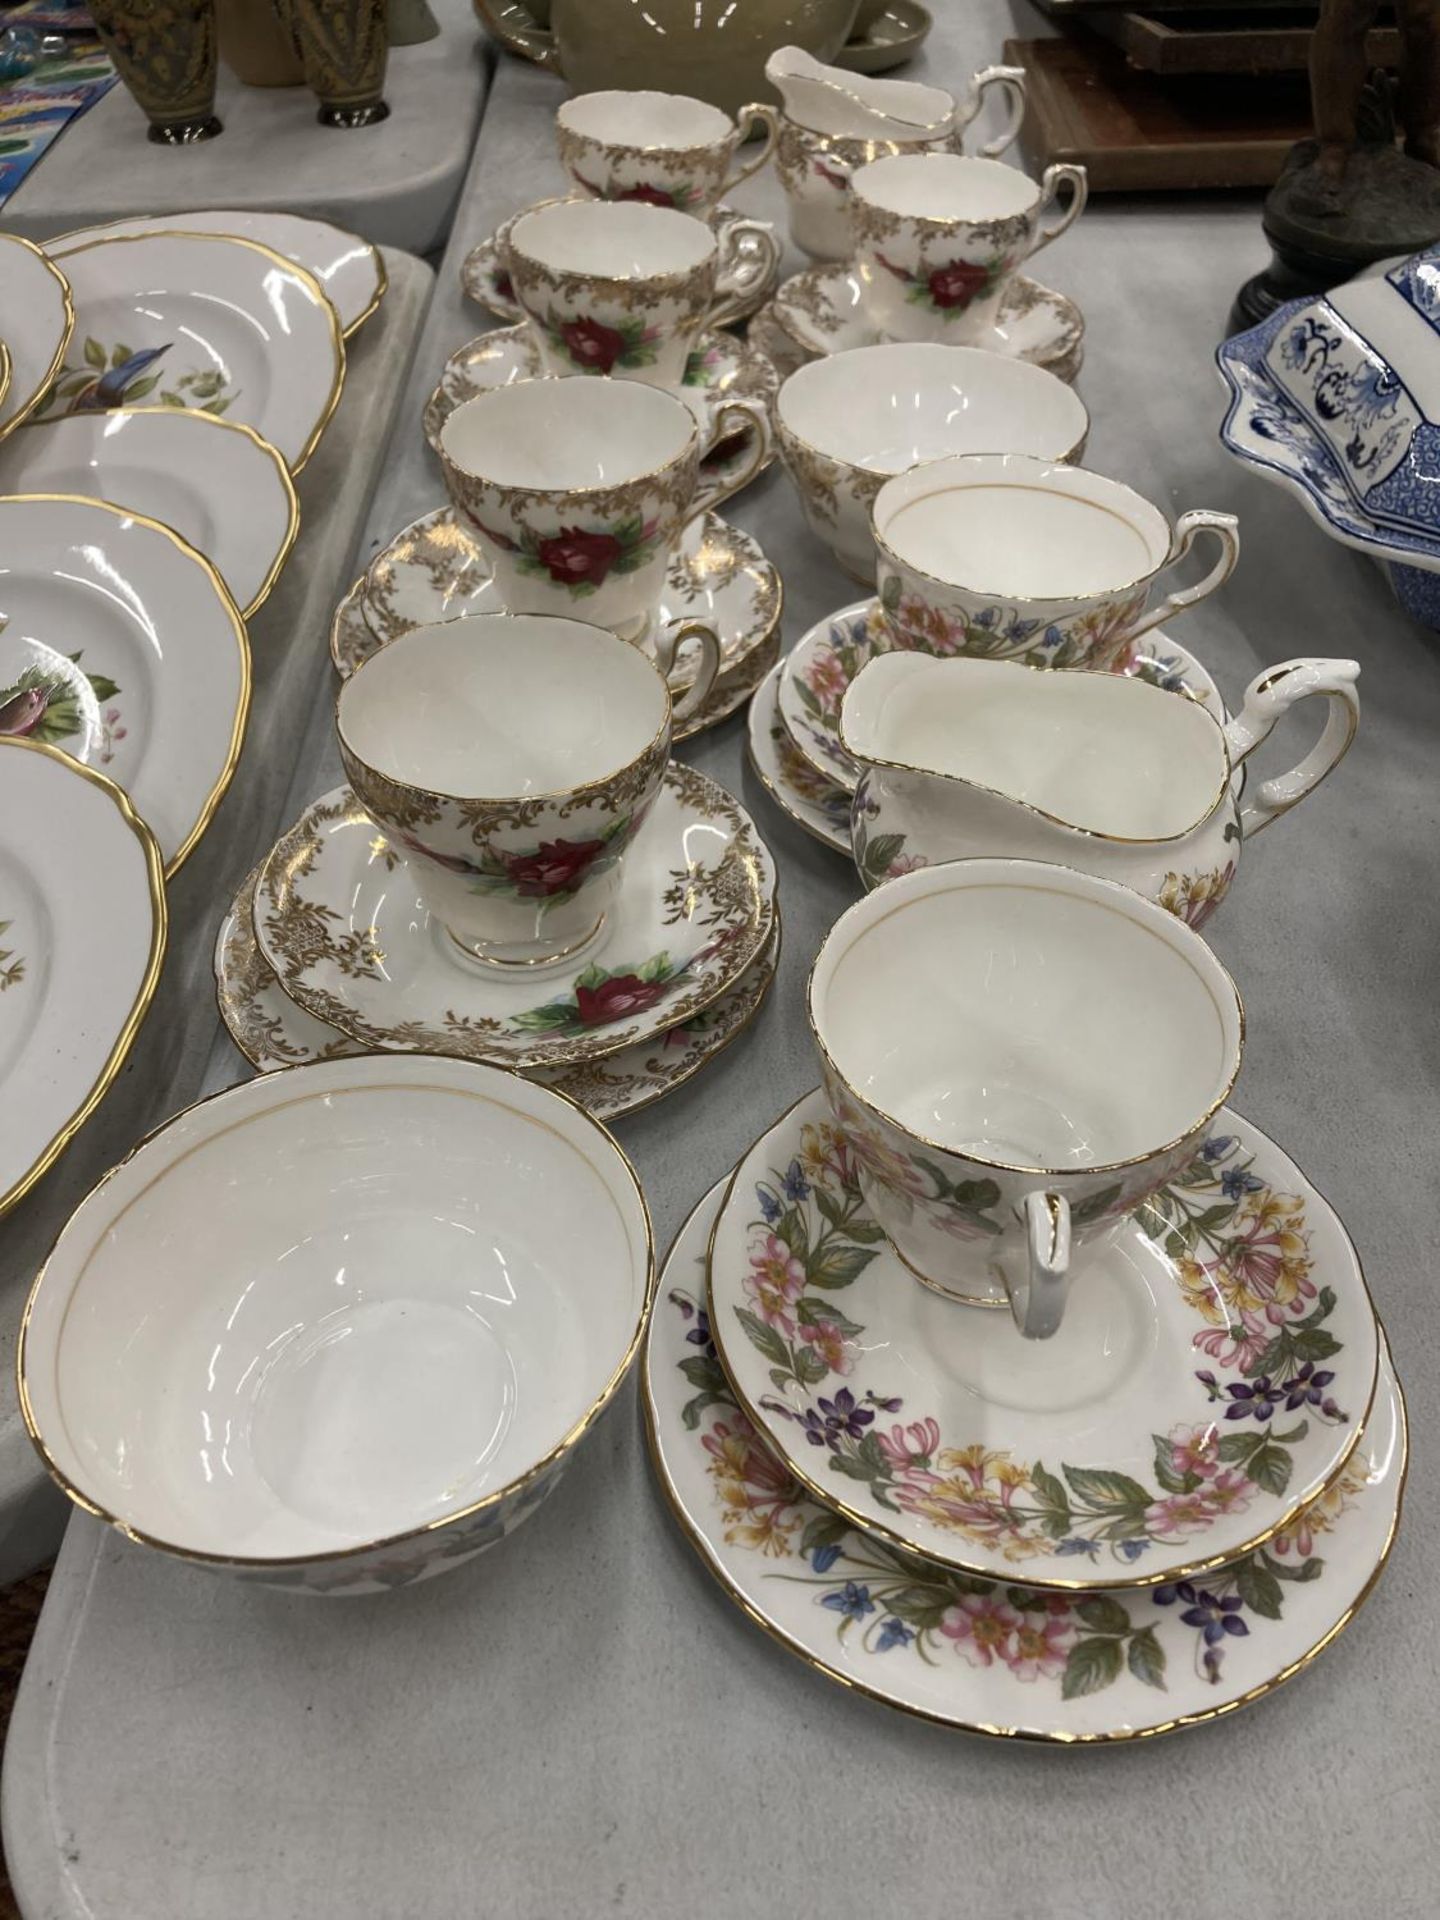 A QUANTITY PARAGON 'COUNTRY LANE' CUPS, SAUCERS AND SIDE PLATES PLUS PARAGON CUPS, SAUCERS, SIDE